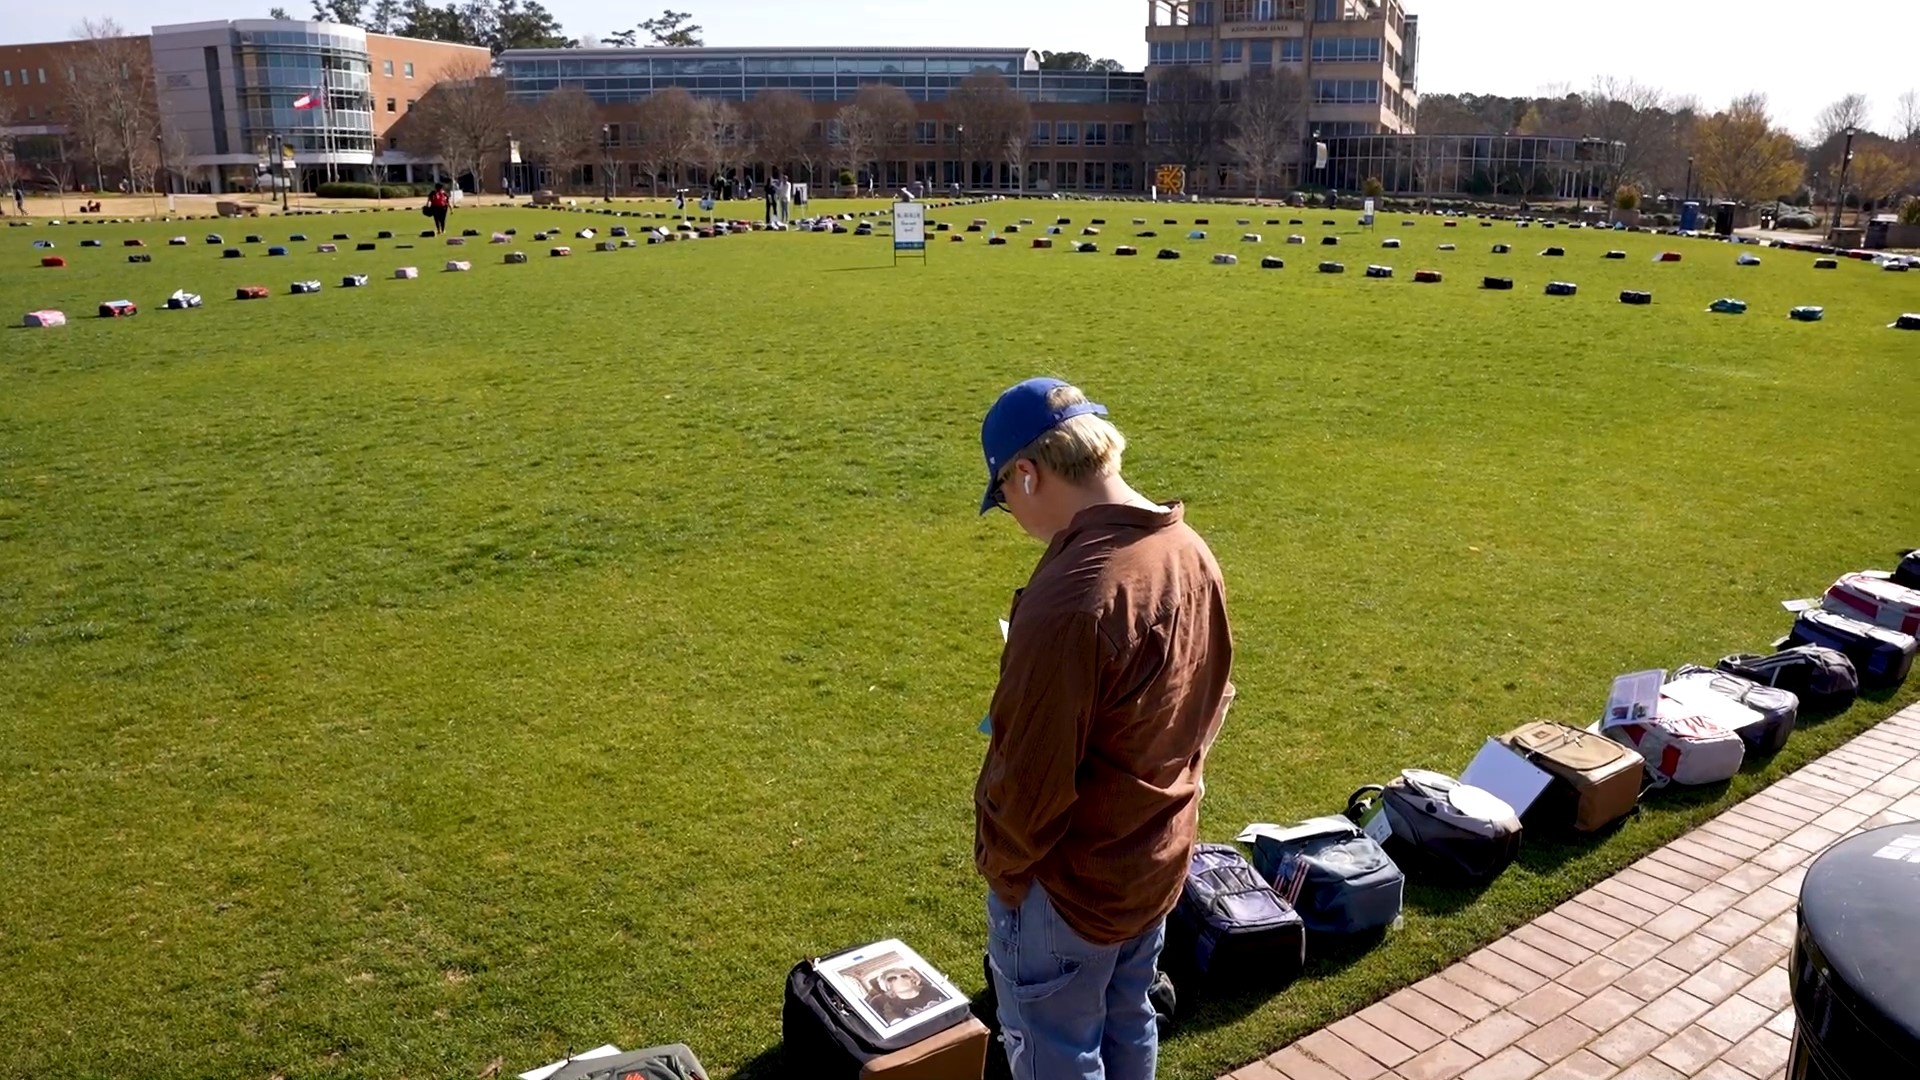 Each backpack represents the 1,100 students who lose their lives to suicide every year.